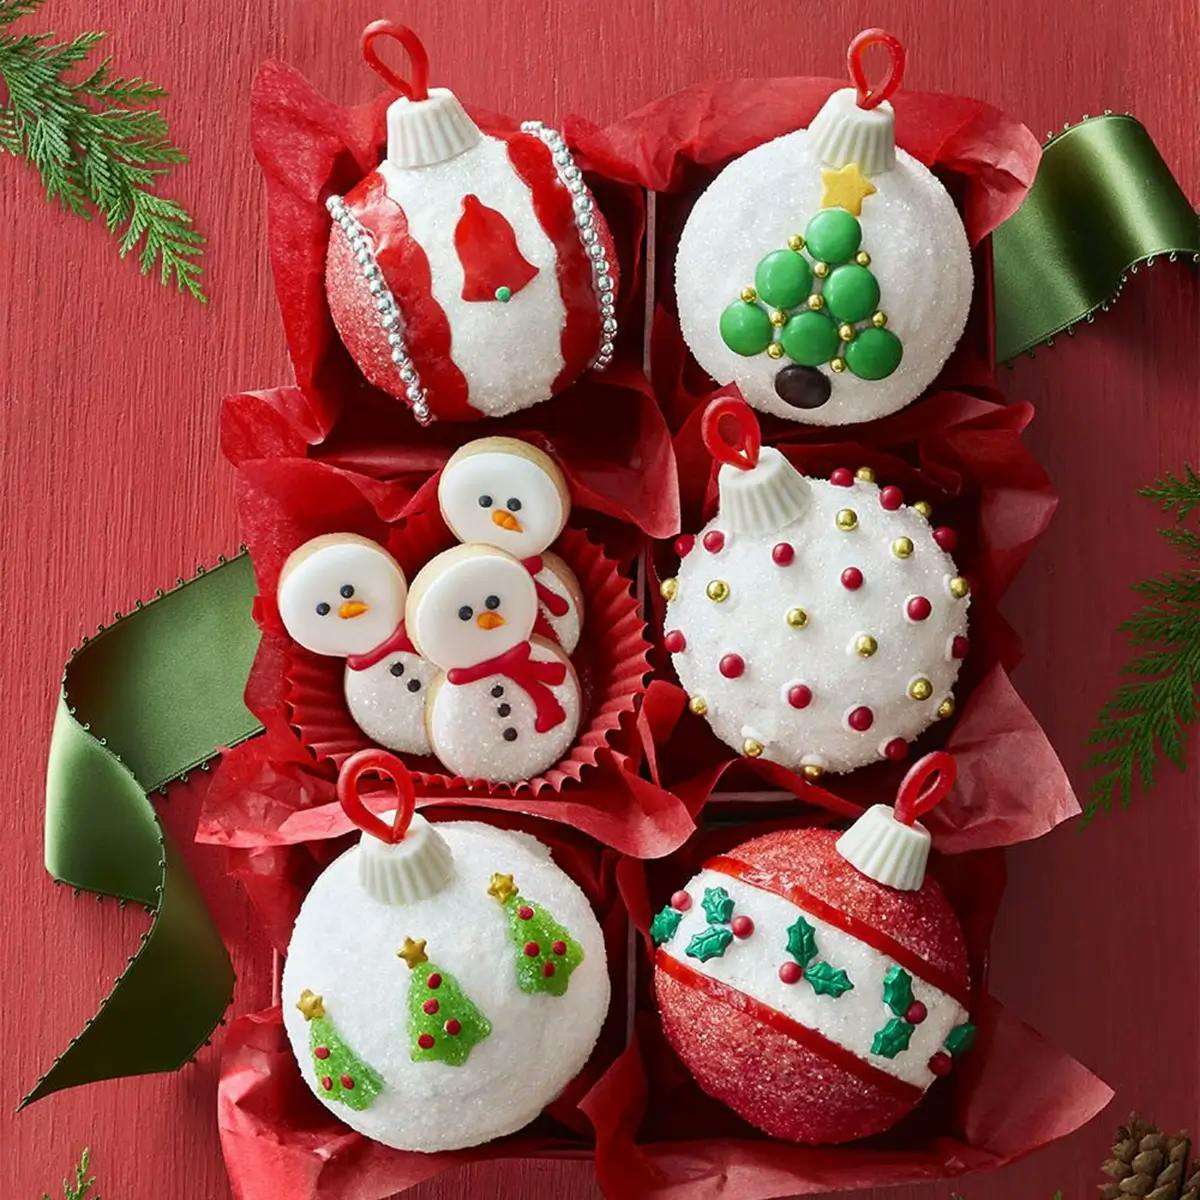 A box of red tissue-paper filled, Christmas cupcake ornaments in red, white and green, sparkling with holiday colors and adornments flanked by a loose green ribbon.